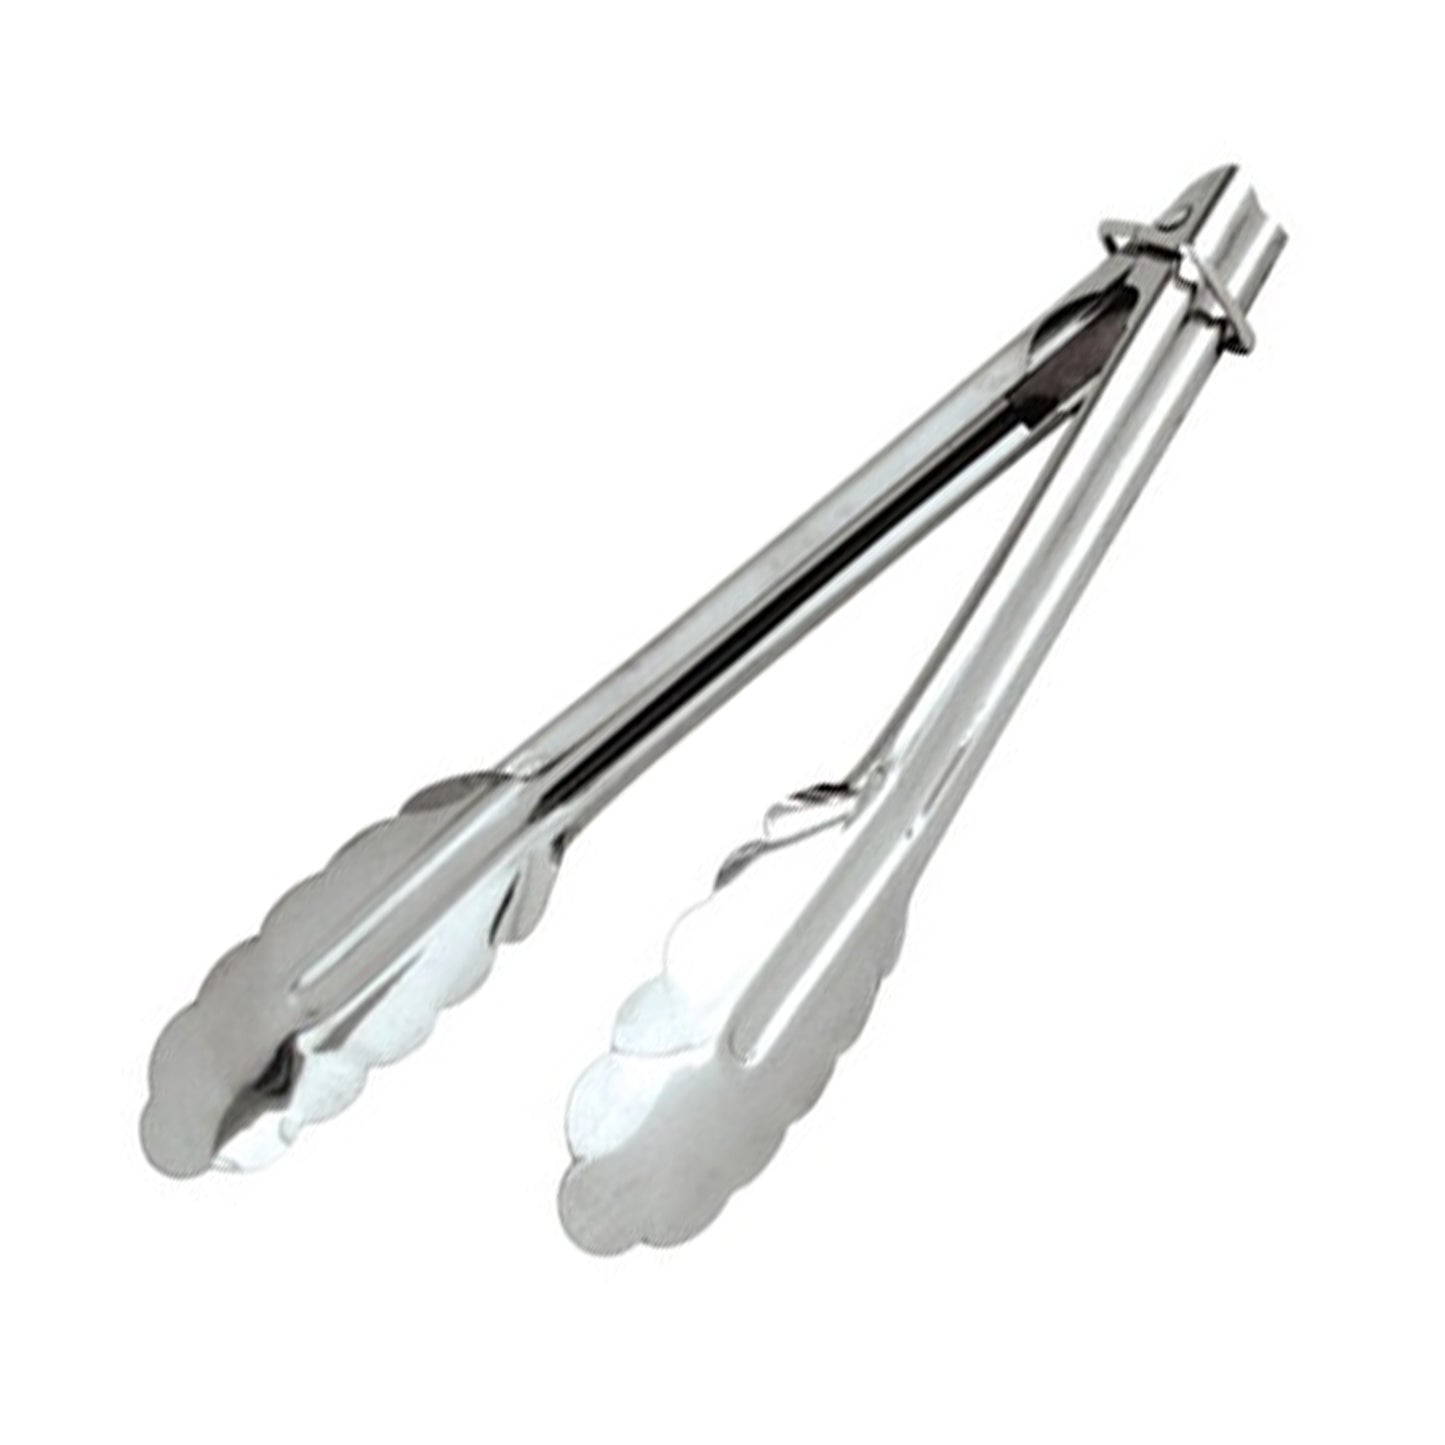 Stainless steel kitchen tong